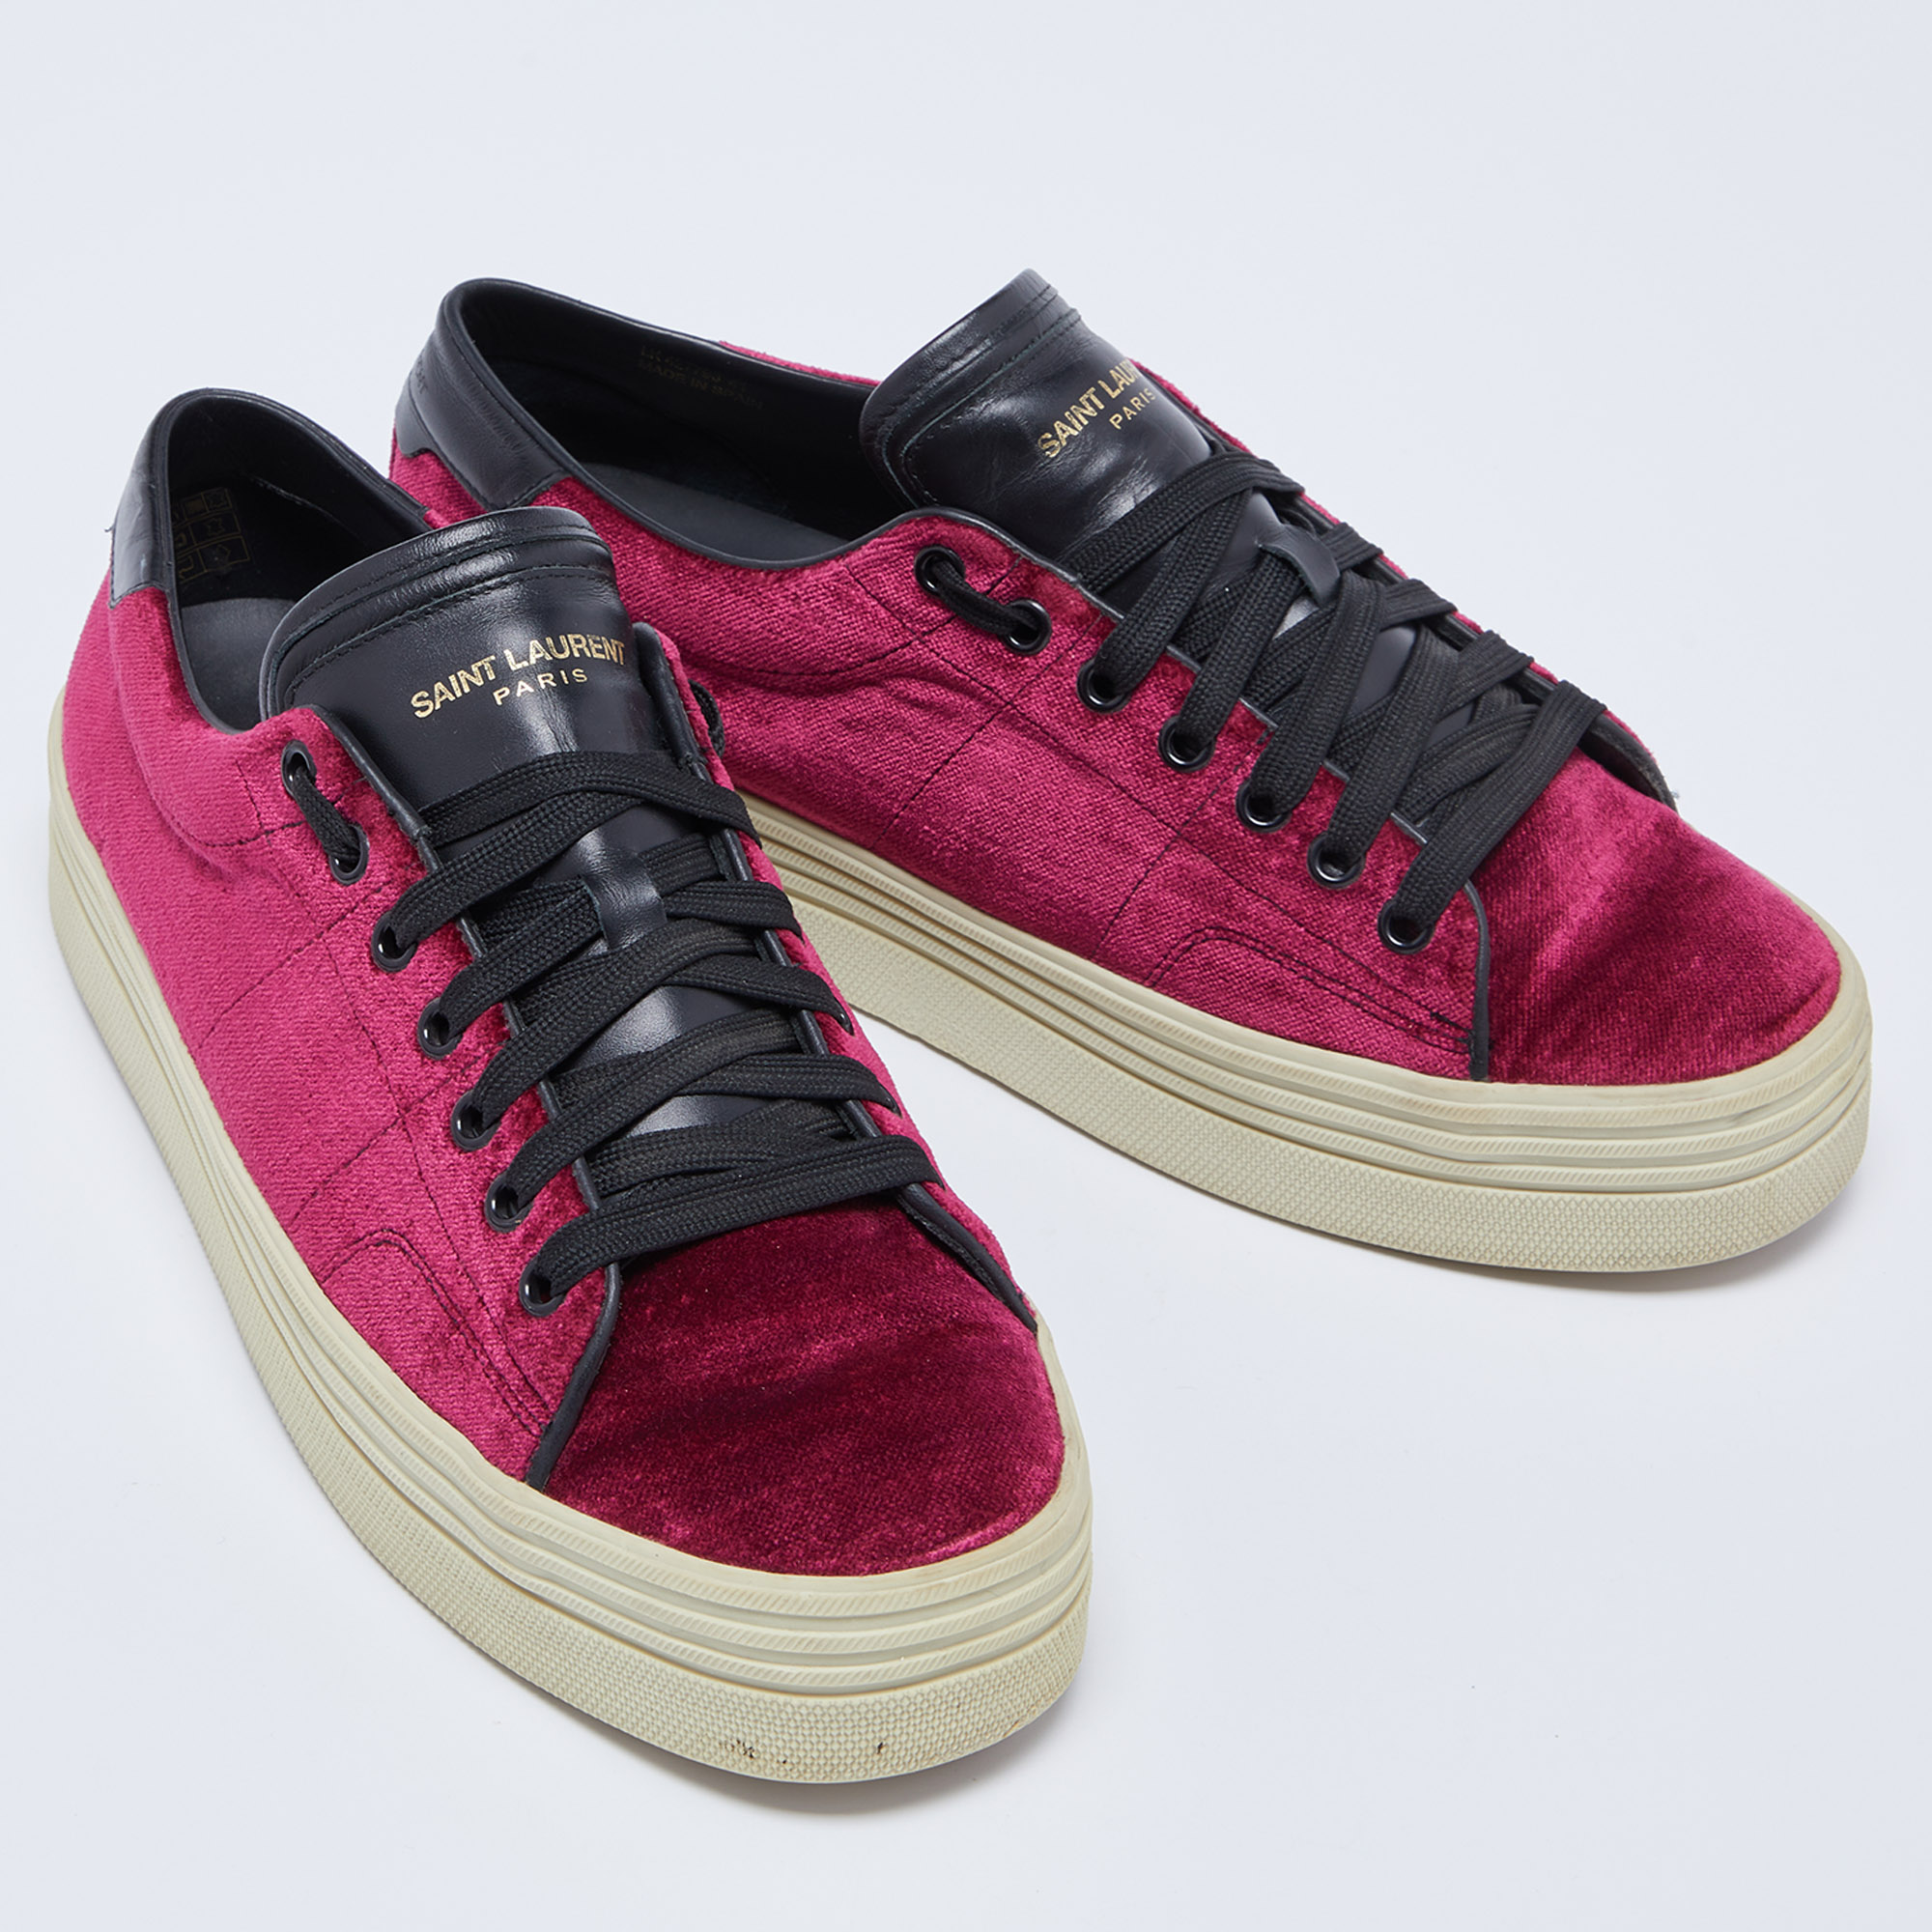 Saint Laurent Burgundy Velvet And Leather Low Top Sneakers Size 41